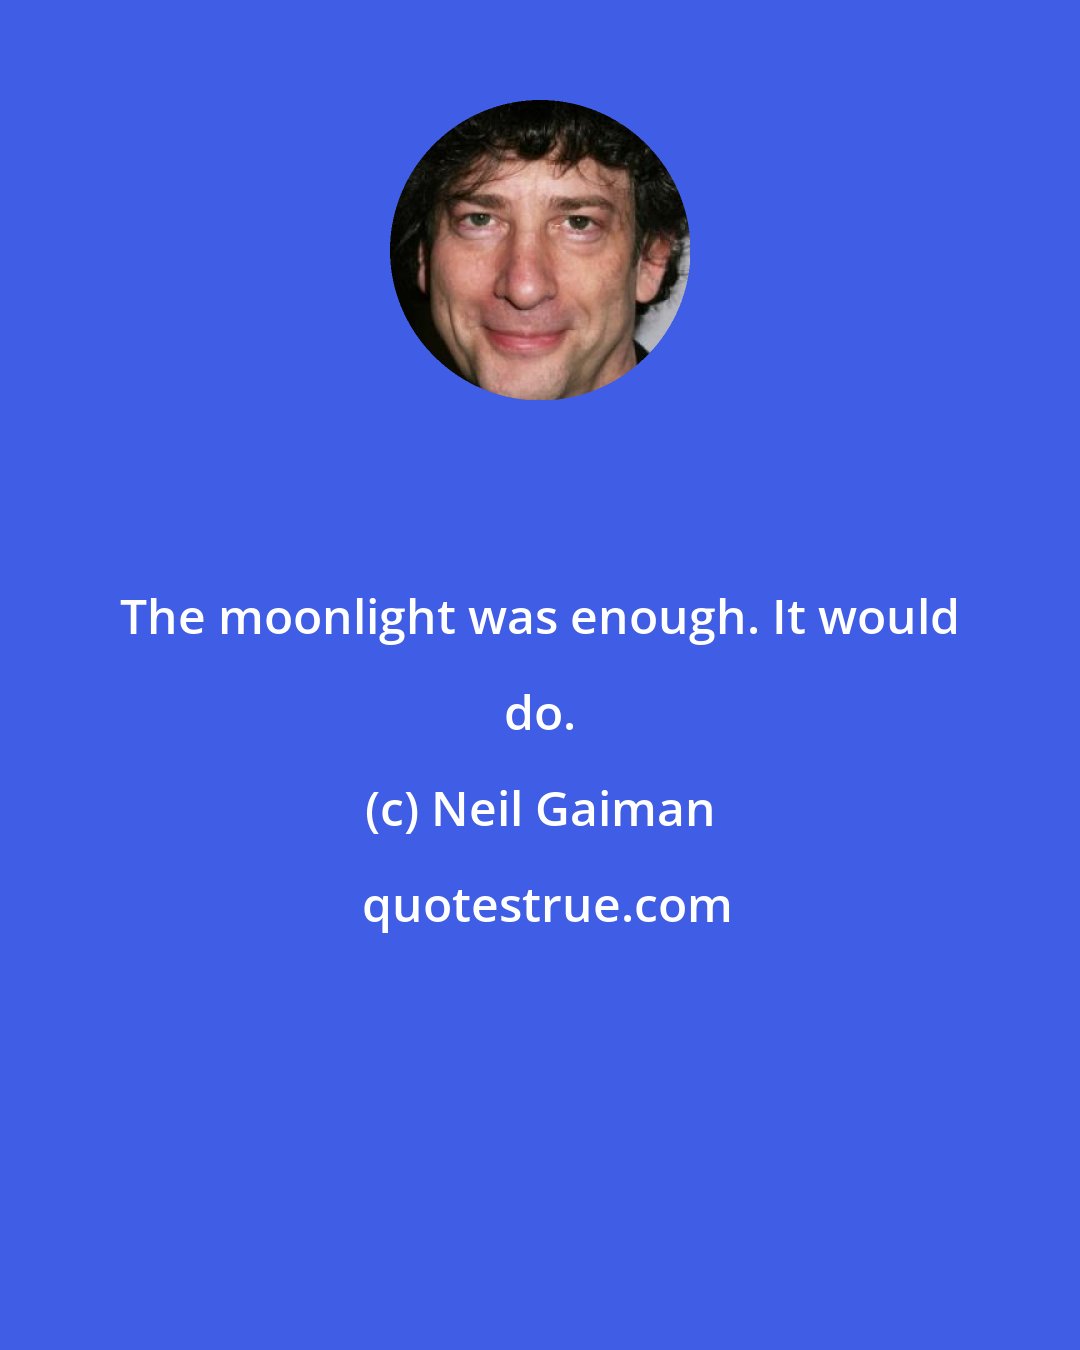 Neil Gaiman: The moonlight was enough. It would do.